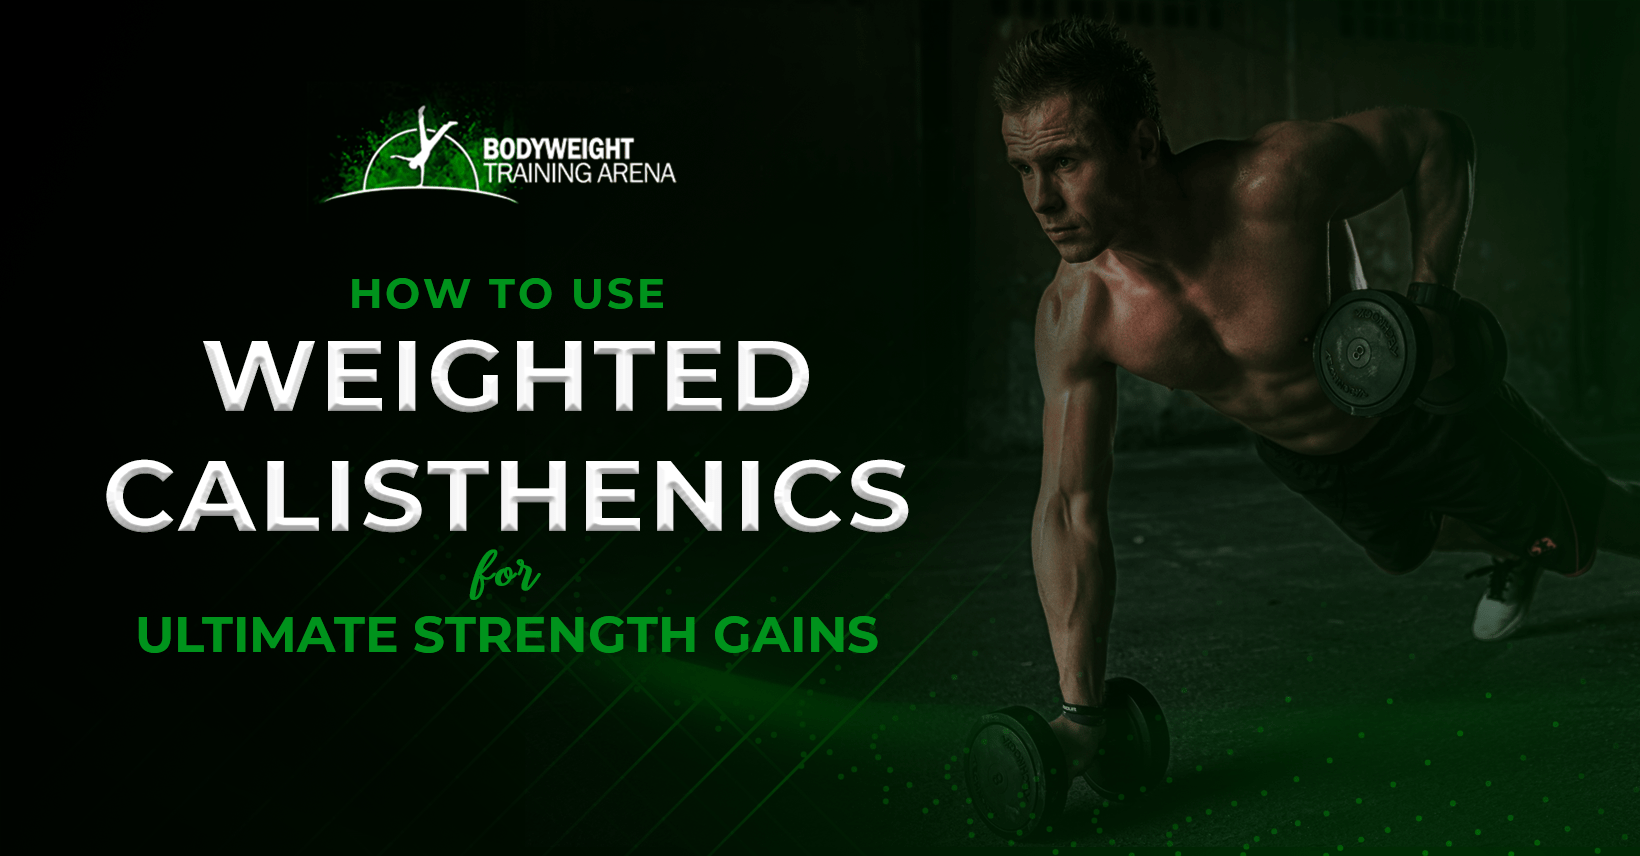 How To Use Weighted Calisthenics For Ultimate Strength Gains